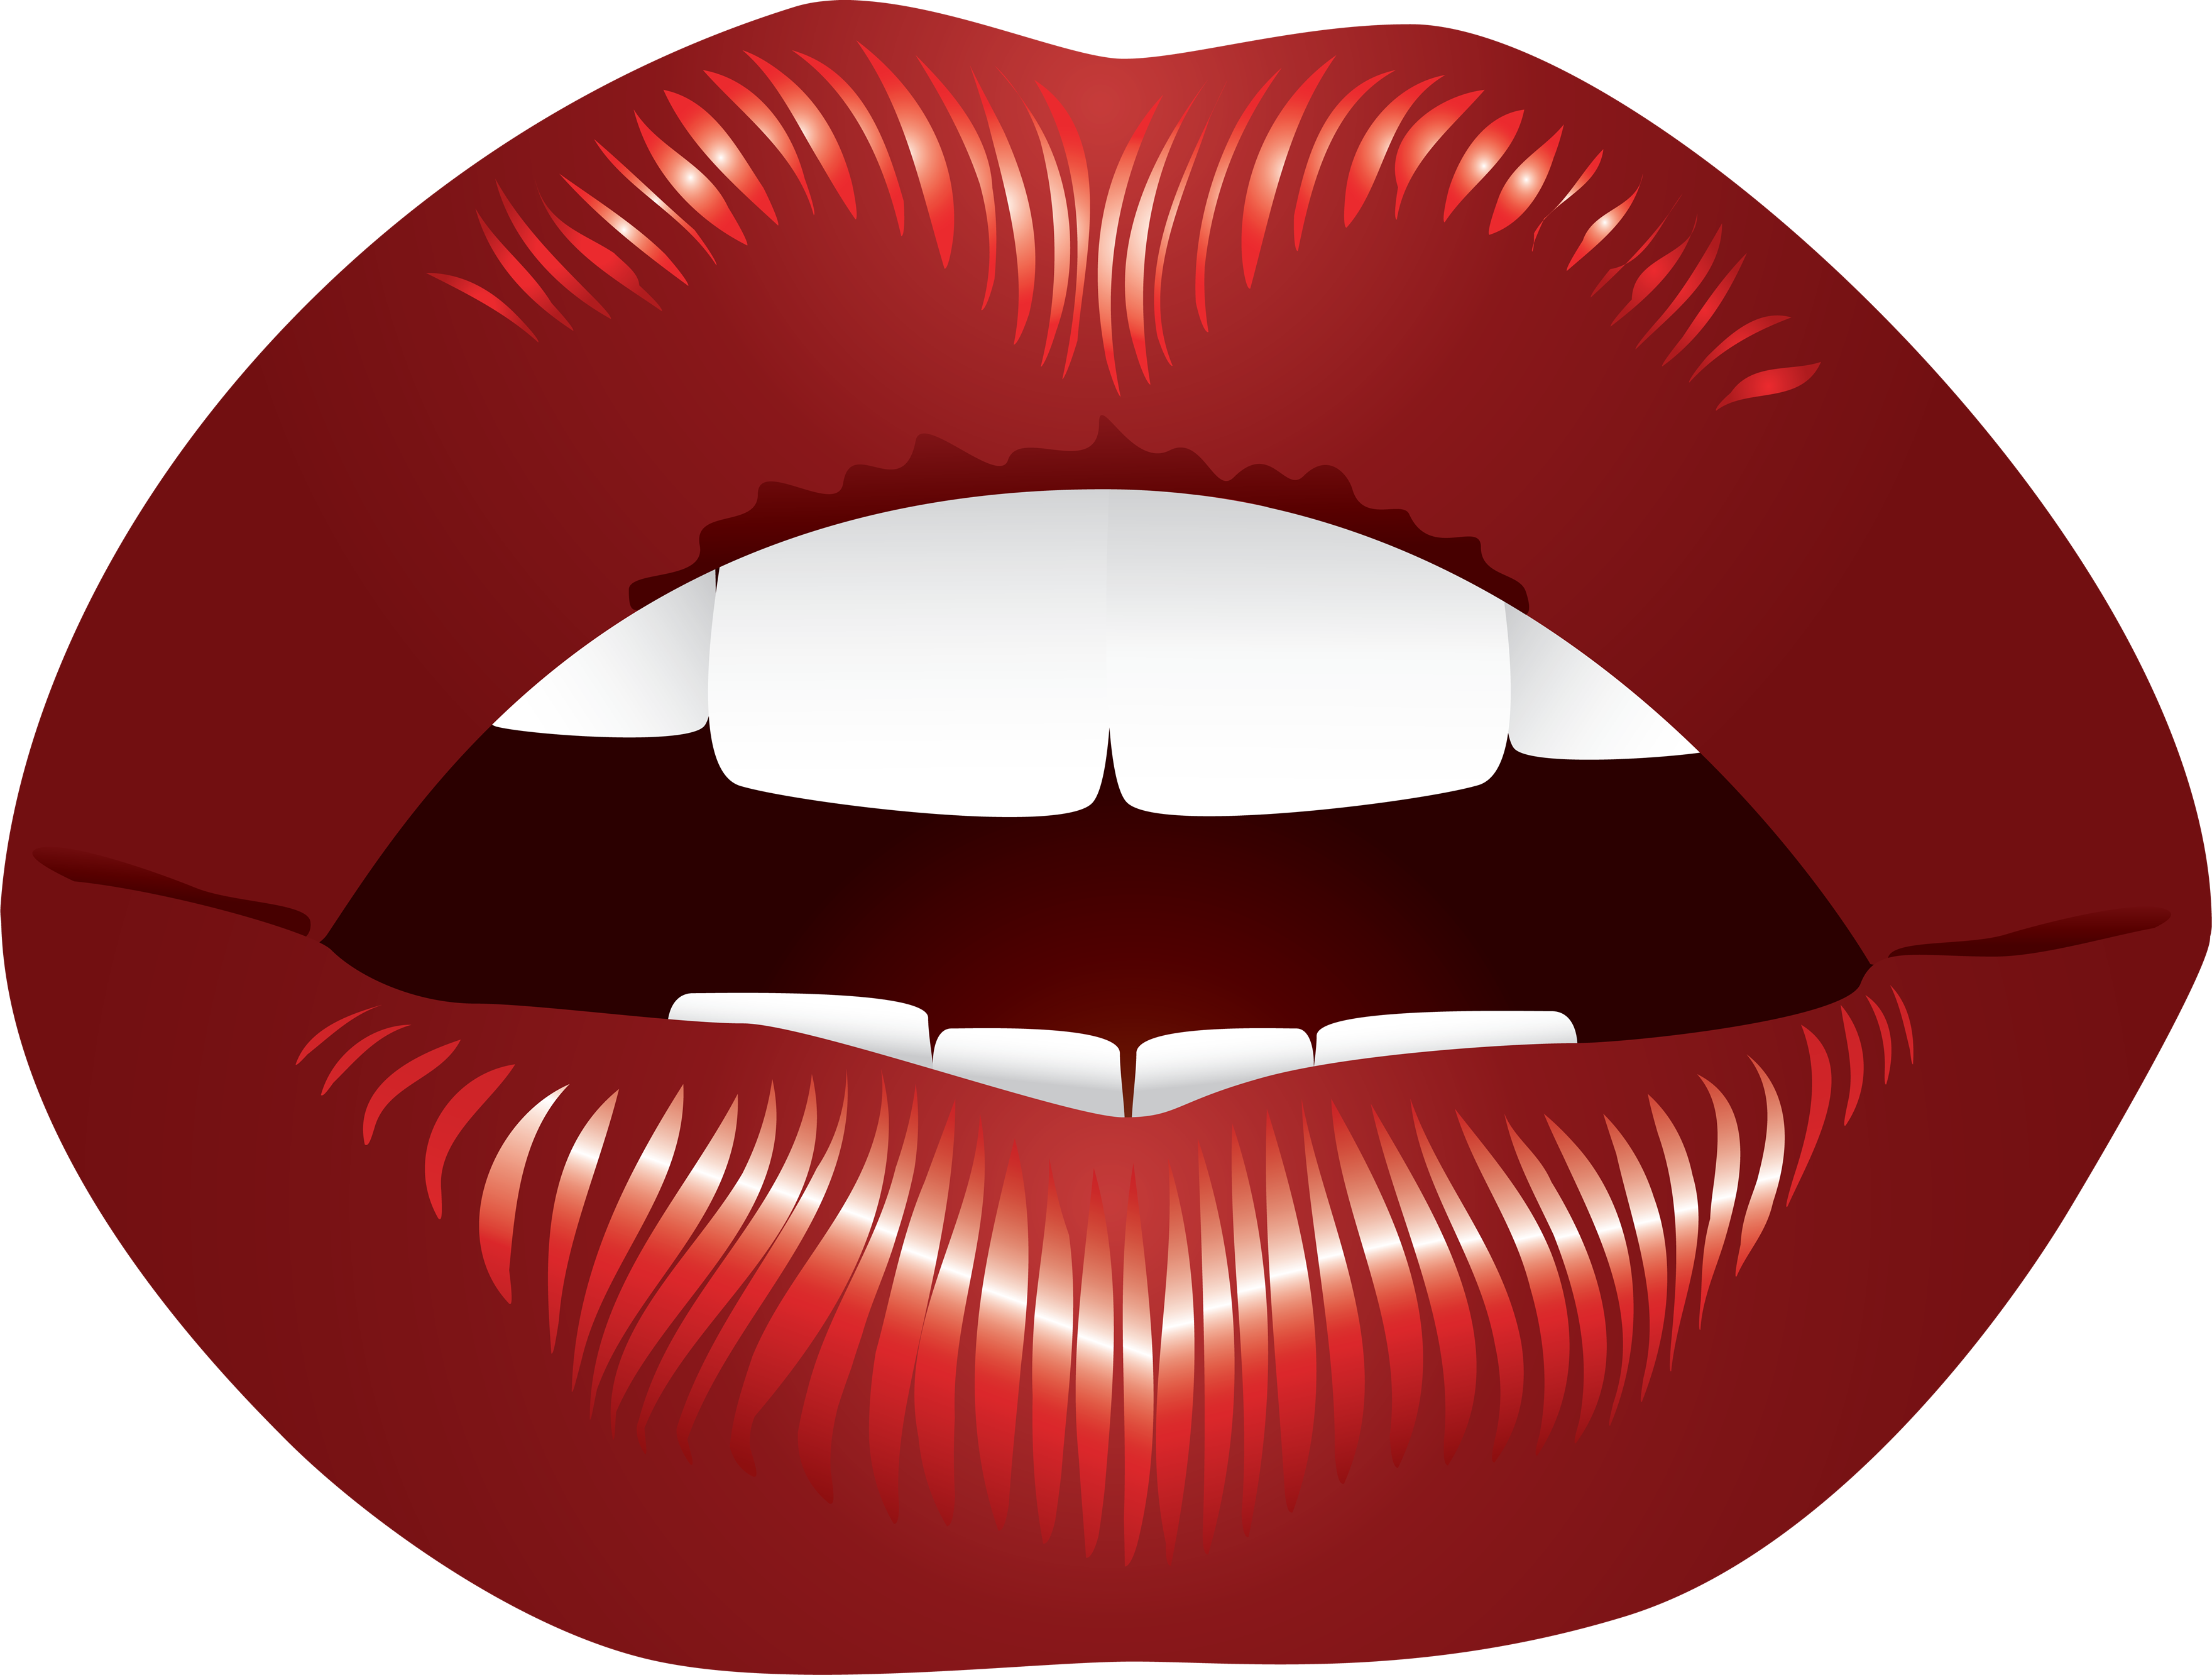 Zipped Lips Png - Lips Png Image, Transparent background PNG HD thumbnail